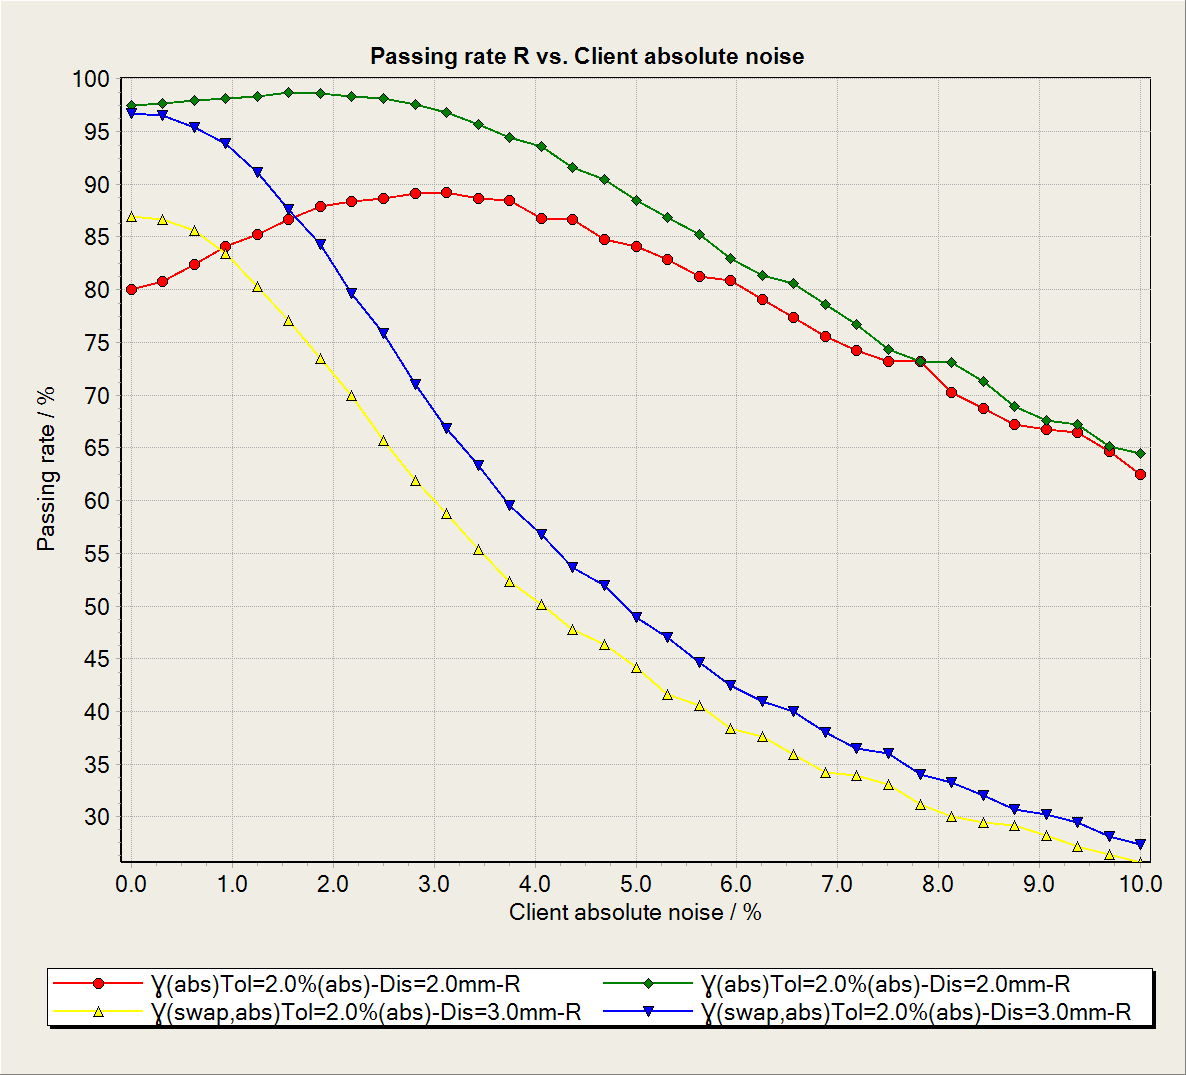 Graph showing passing rate R versus Client absolute noise.